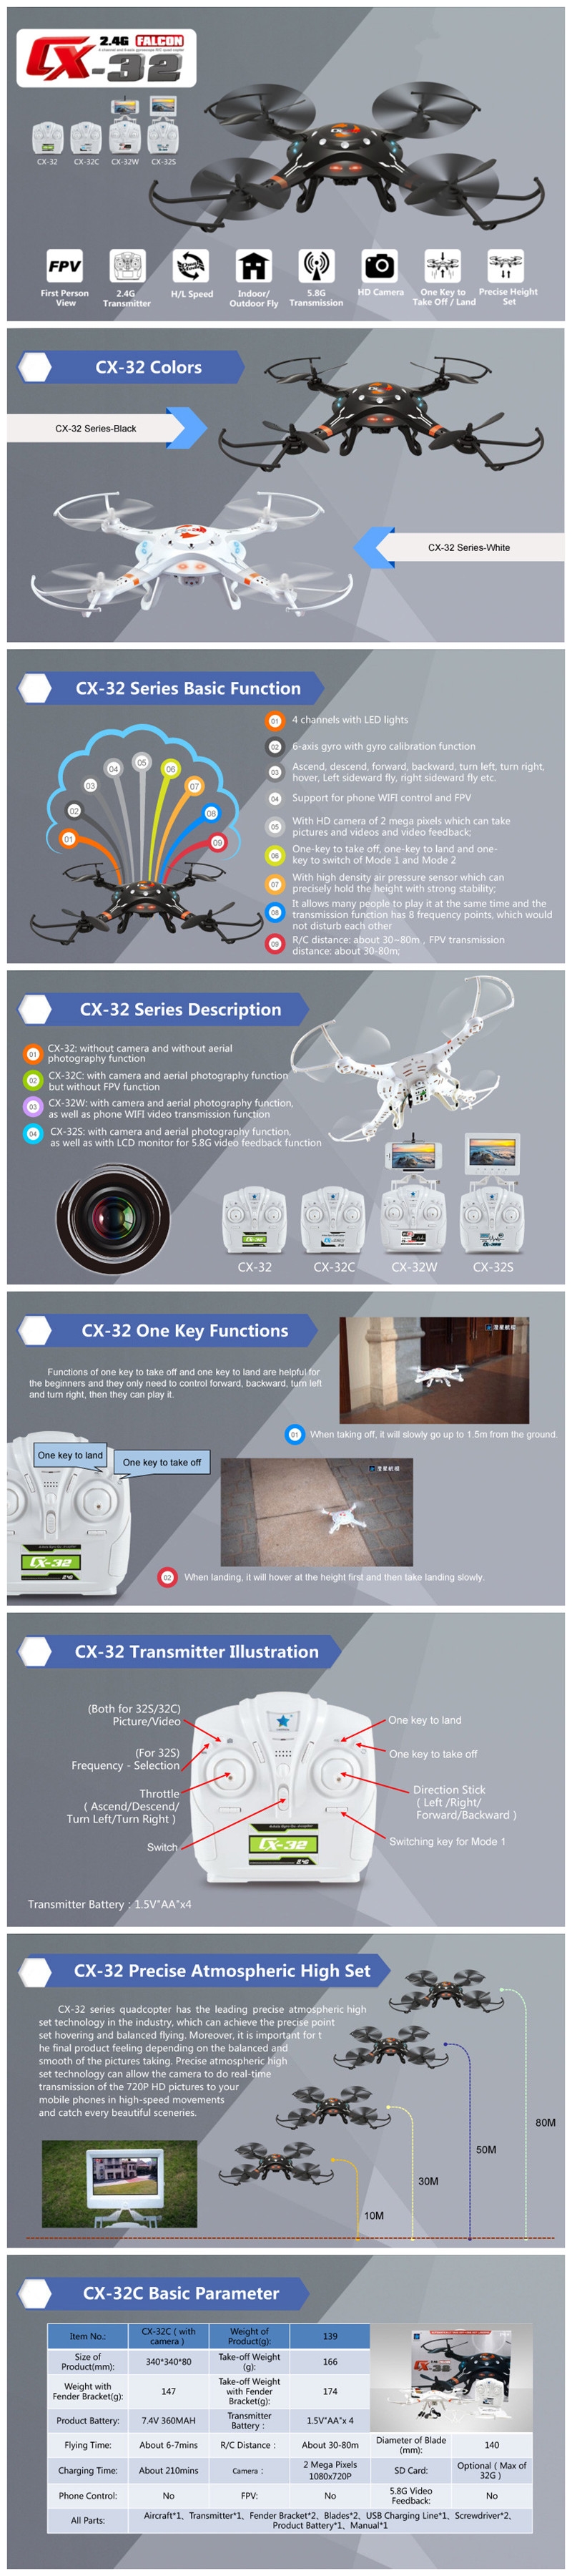 Cheerson CX-32C CX32C 2.0MP HD Camera 2.4G 4CH 6-Axis With High Hold Mode RC Quadcopter RTF